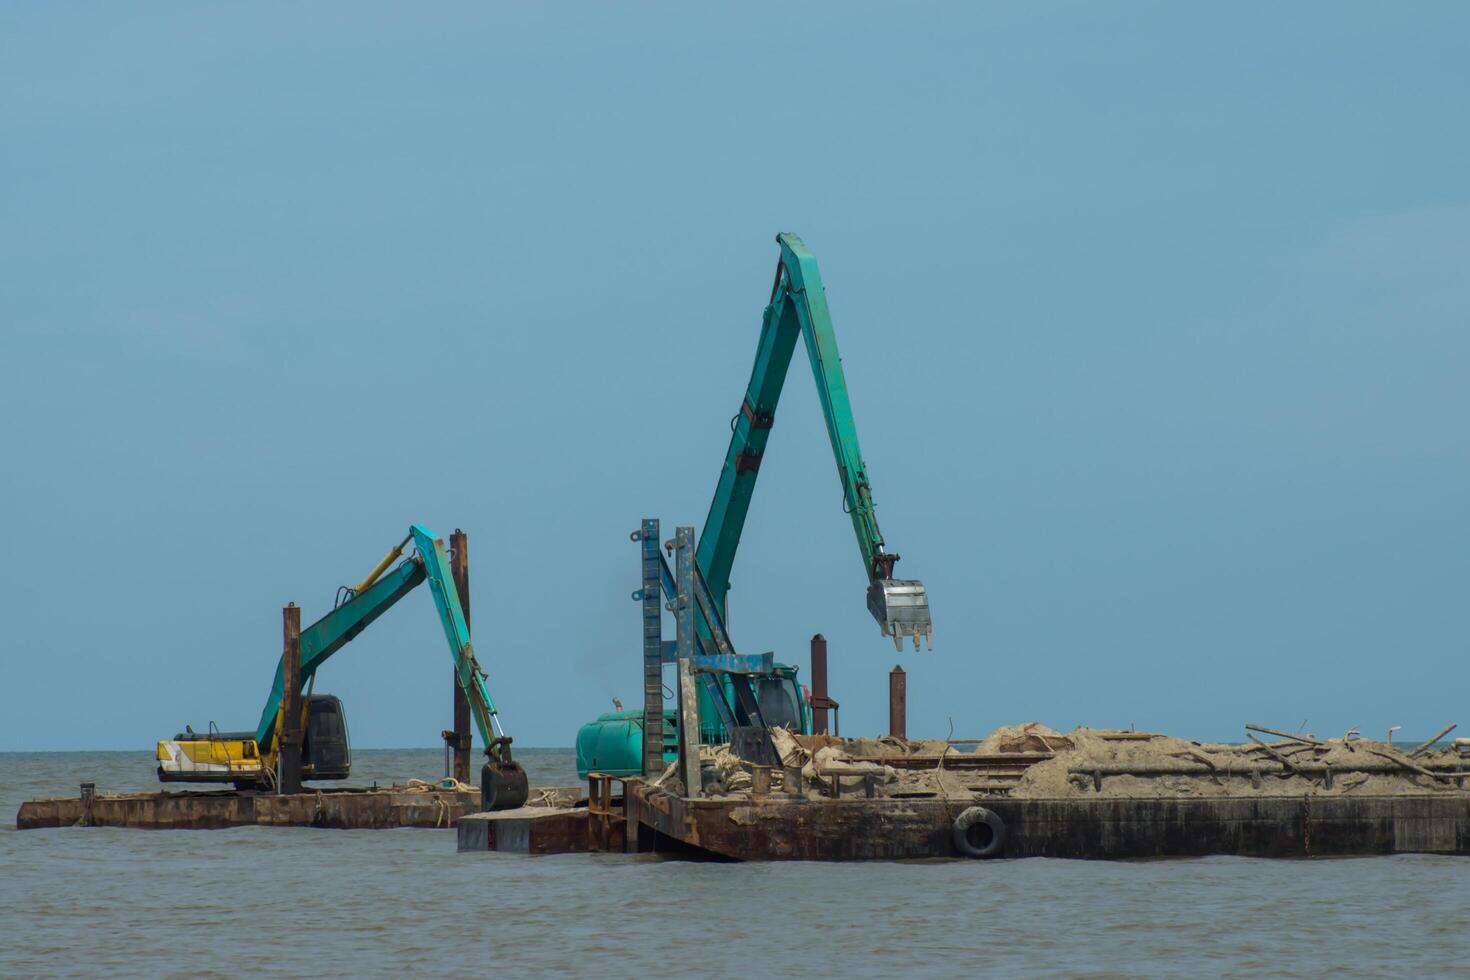 Machines are dredging sand in the sea. photo